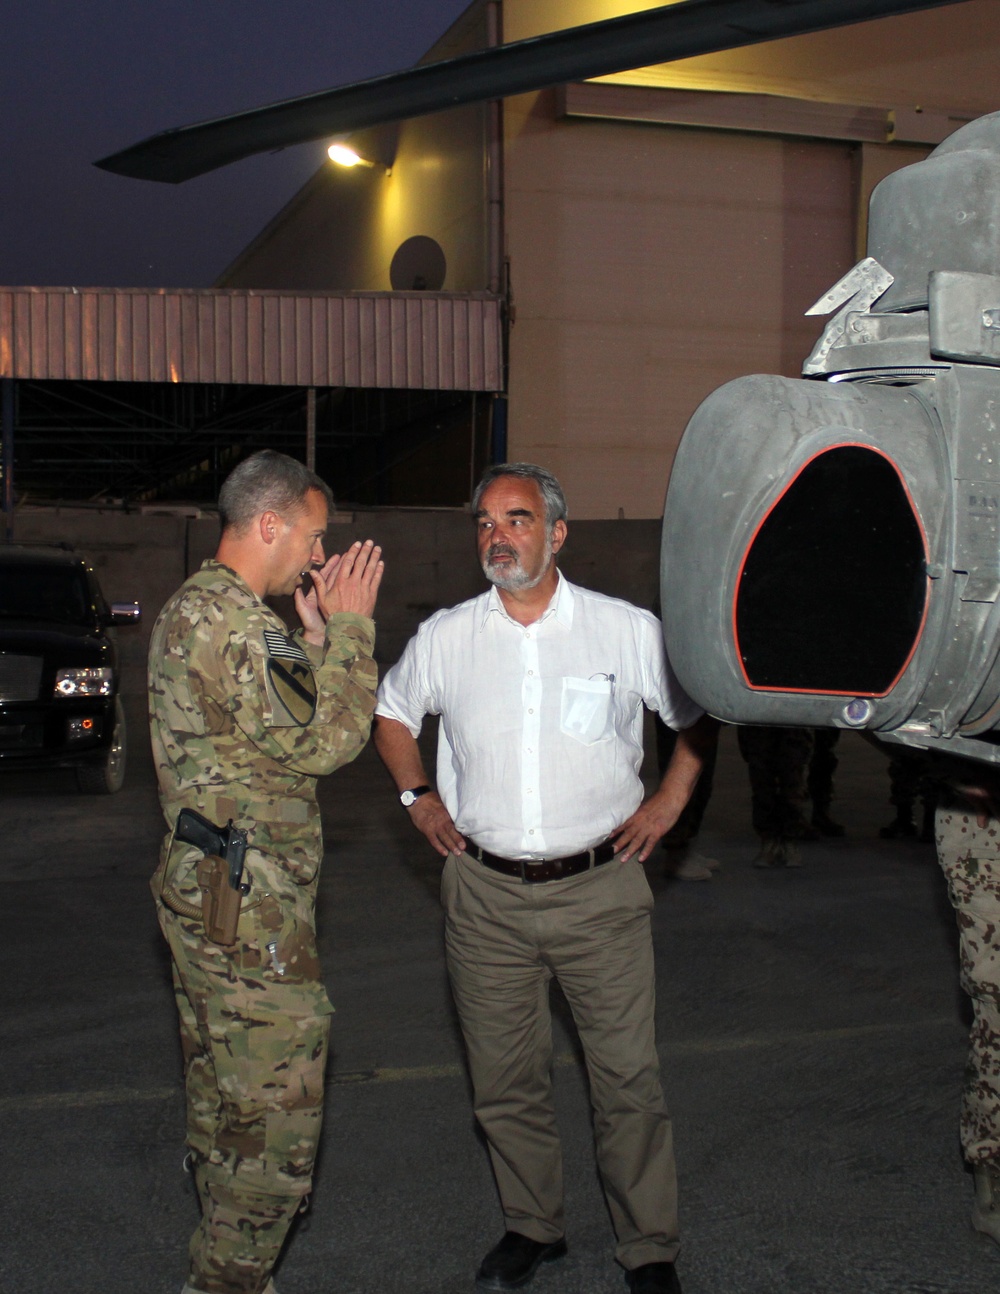 Germany’s deputy defense minister sees German-American partnership during 1st ACB visit